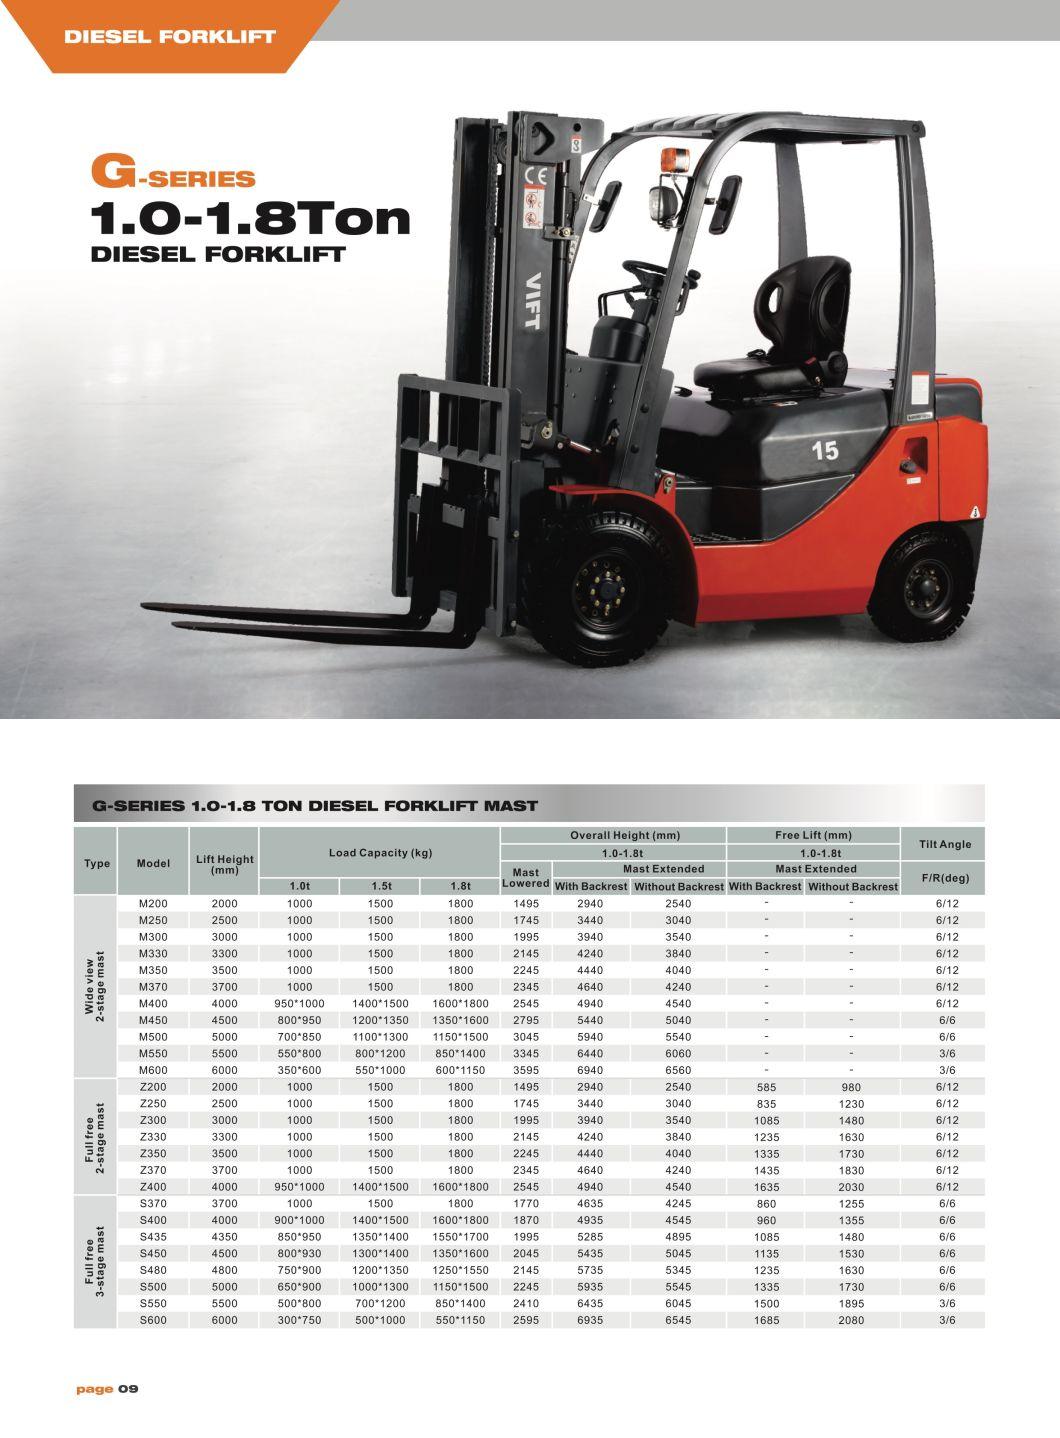 Vift 1.5 T 1.8 T Diesel Forklift Truck Lifting Height 4.5 M Container Mast Solid Tire.